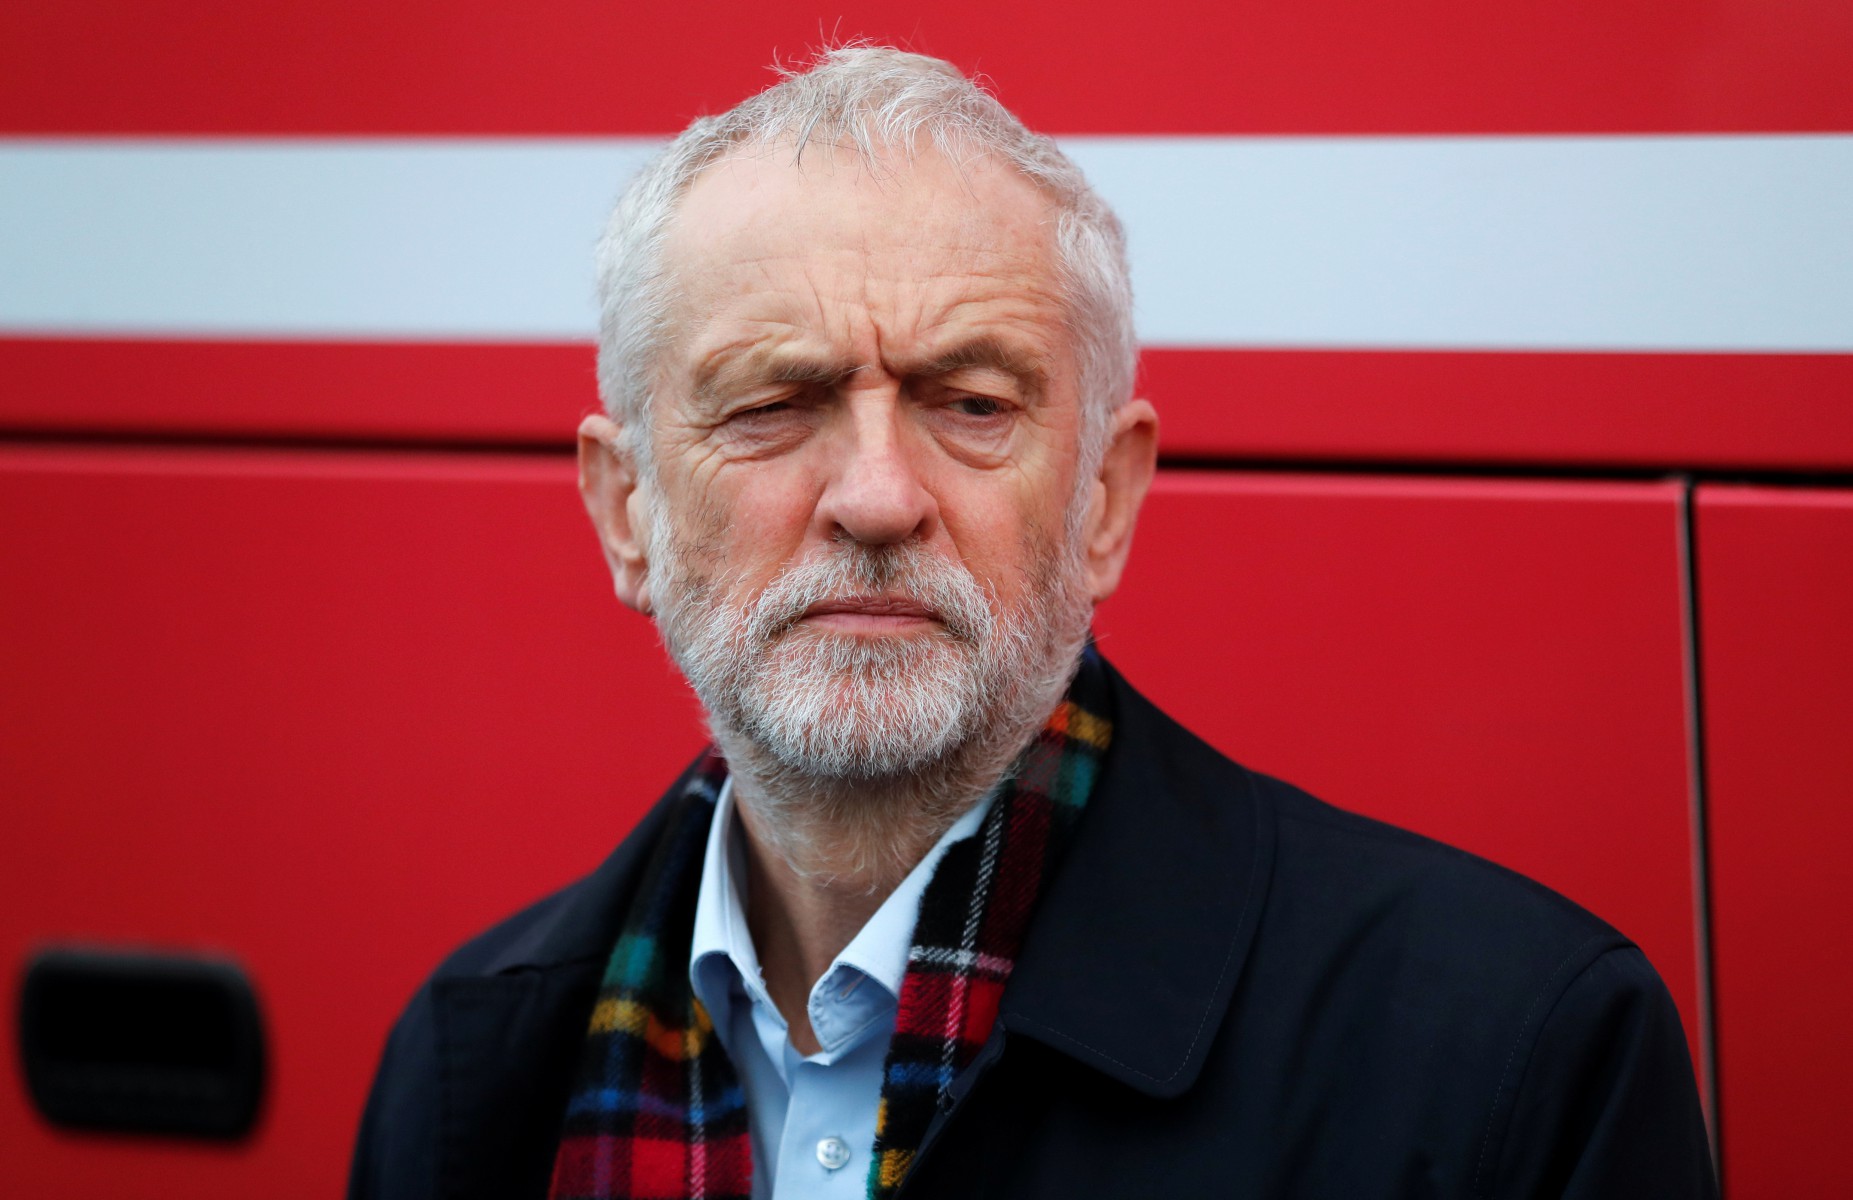 Jeremy Corbyn's leadership has been dogged by accusations of anti-Semitism